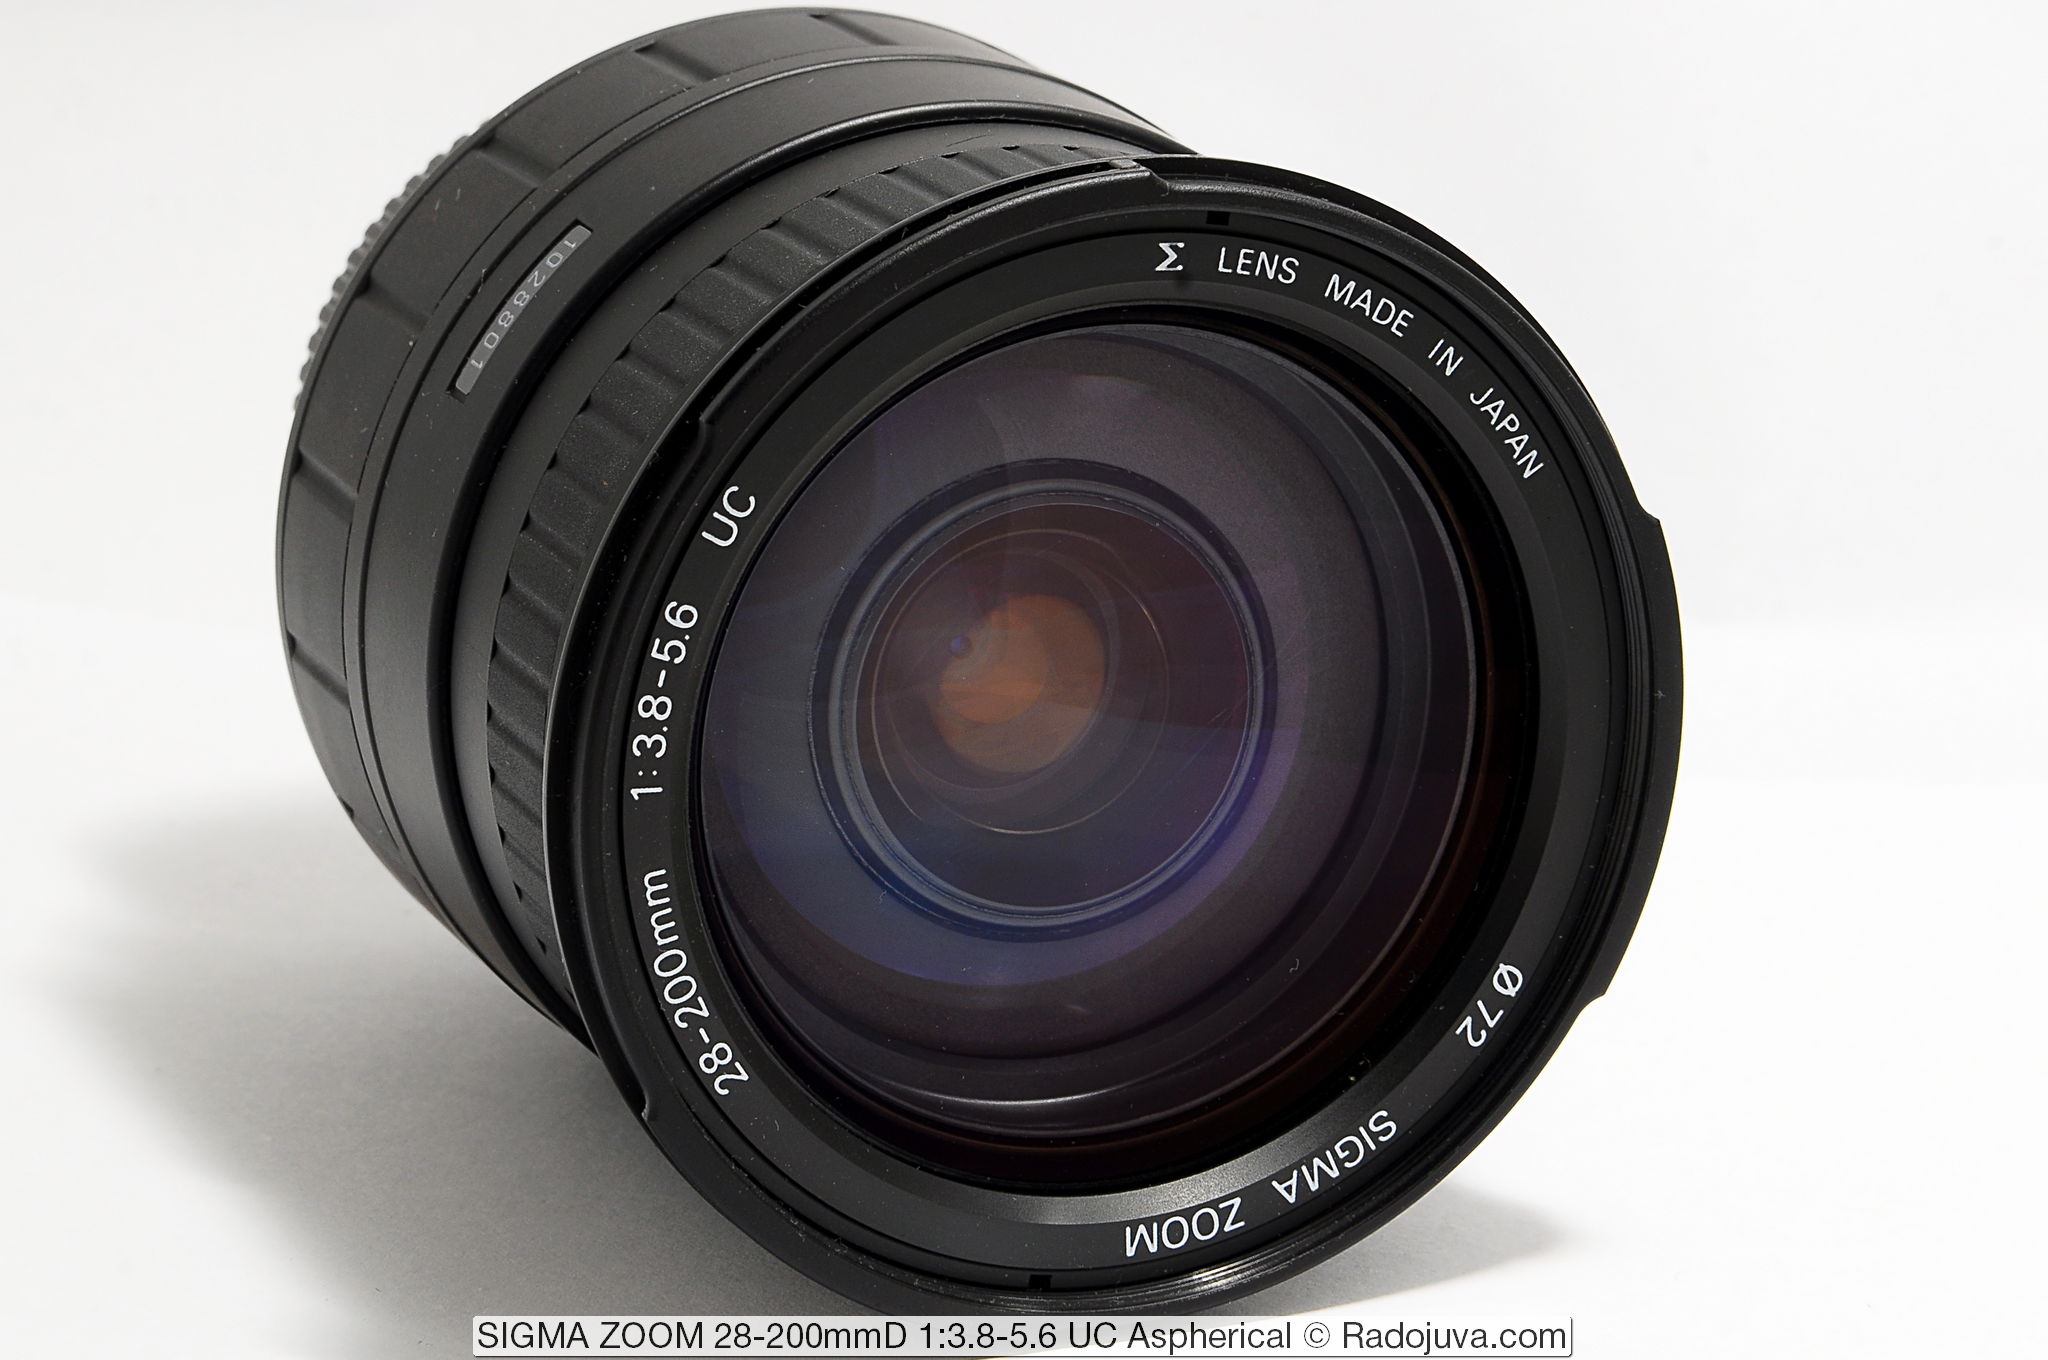 SIGMA ZOOM 28-200mmD 1 Review: 3.8-5.6 UC Aspherical | Happy